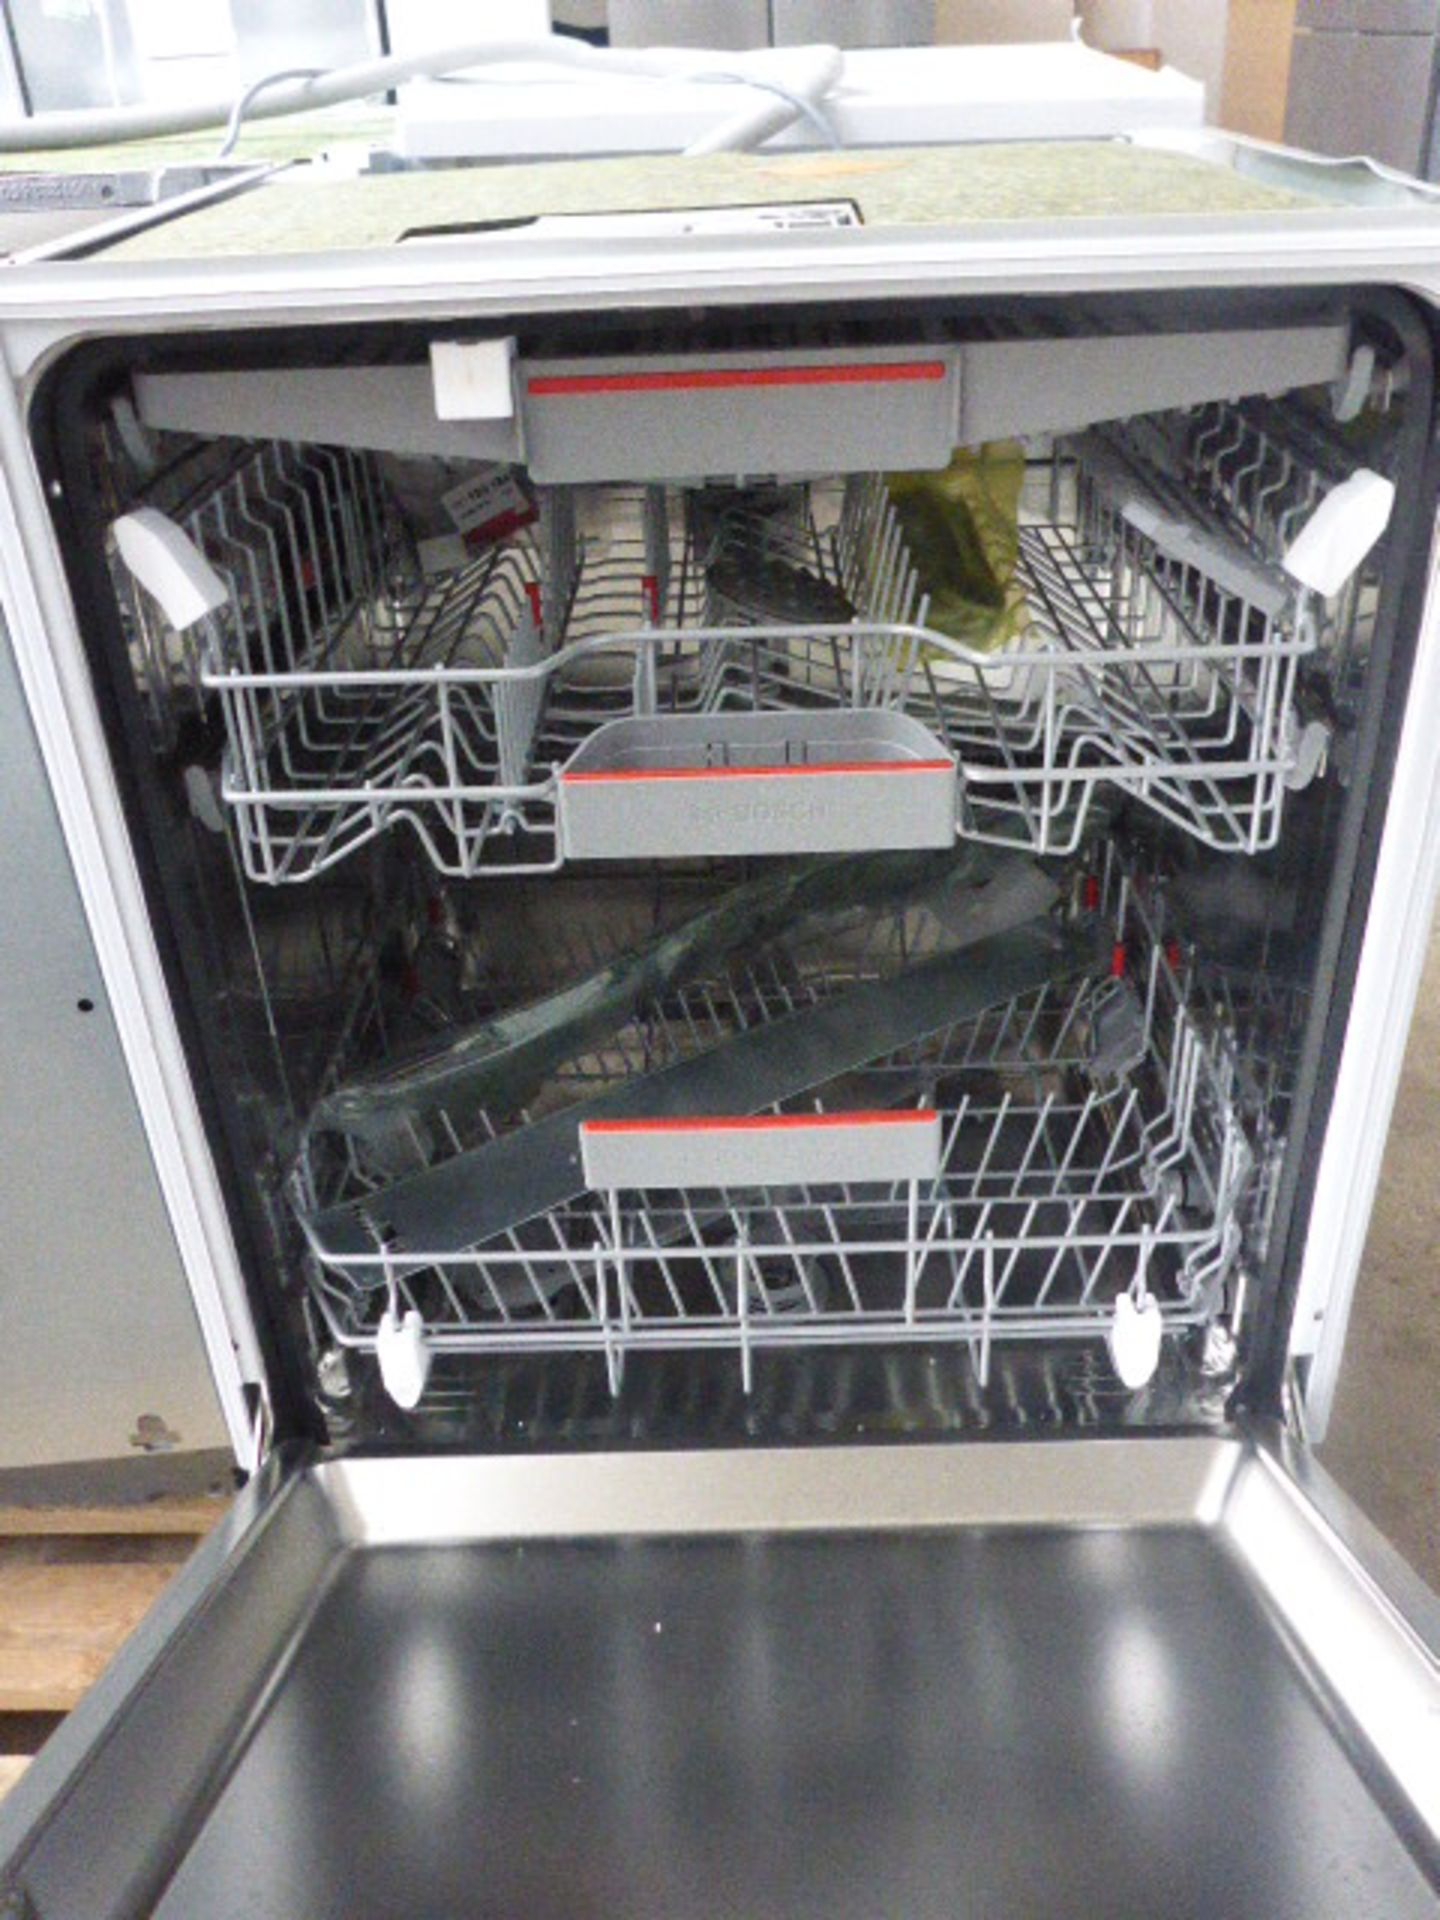 SMV68MD01GB Bosch Dishwasher fully integrated - Image 2 of 2